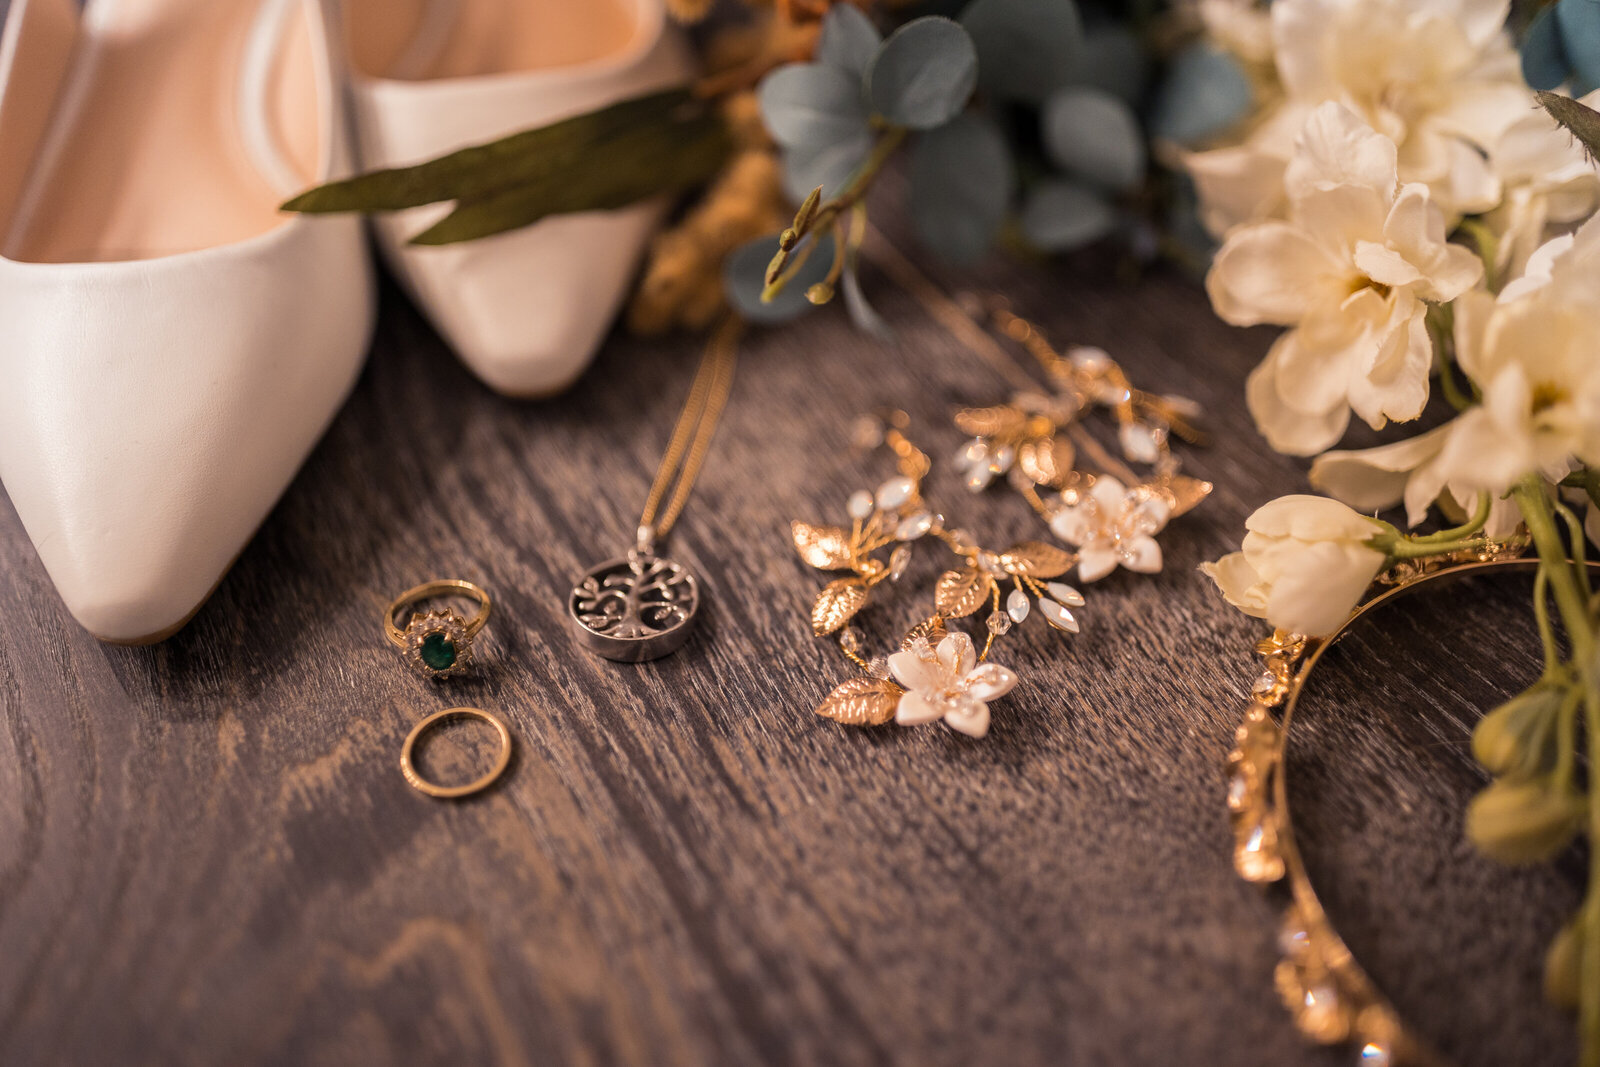 wedding day details including rings, jewelry, shoes, and bouquet